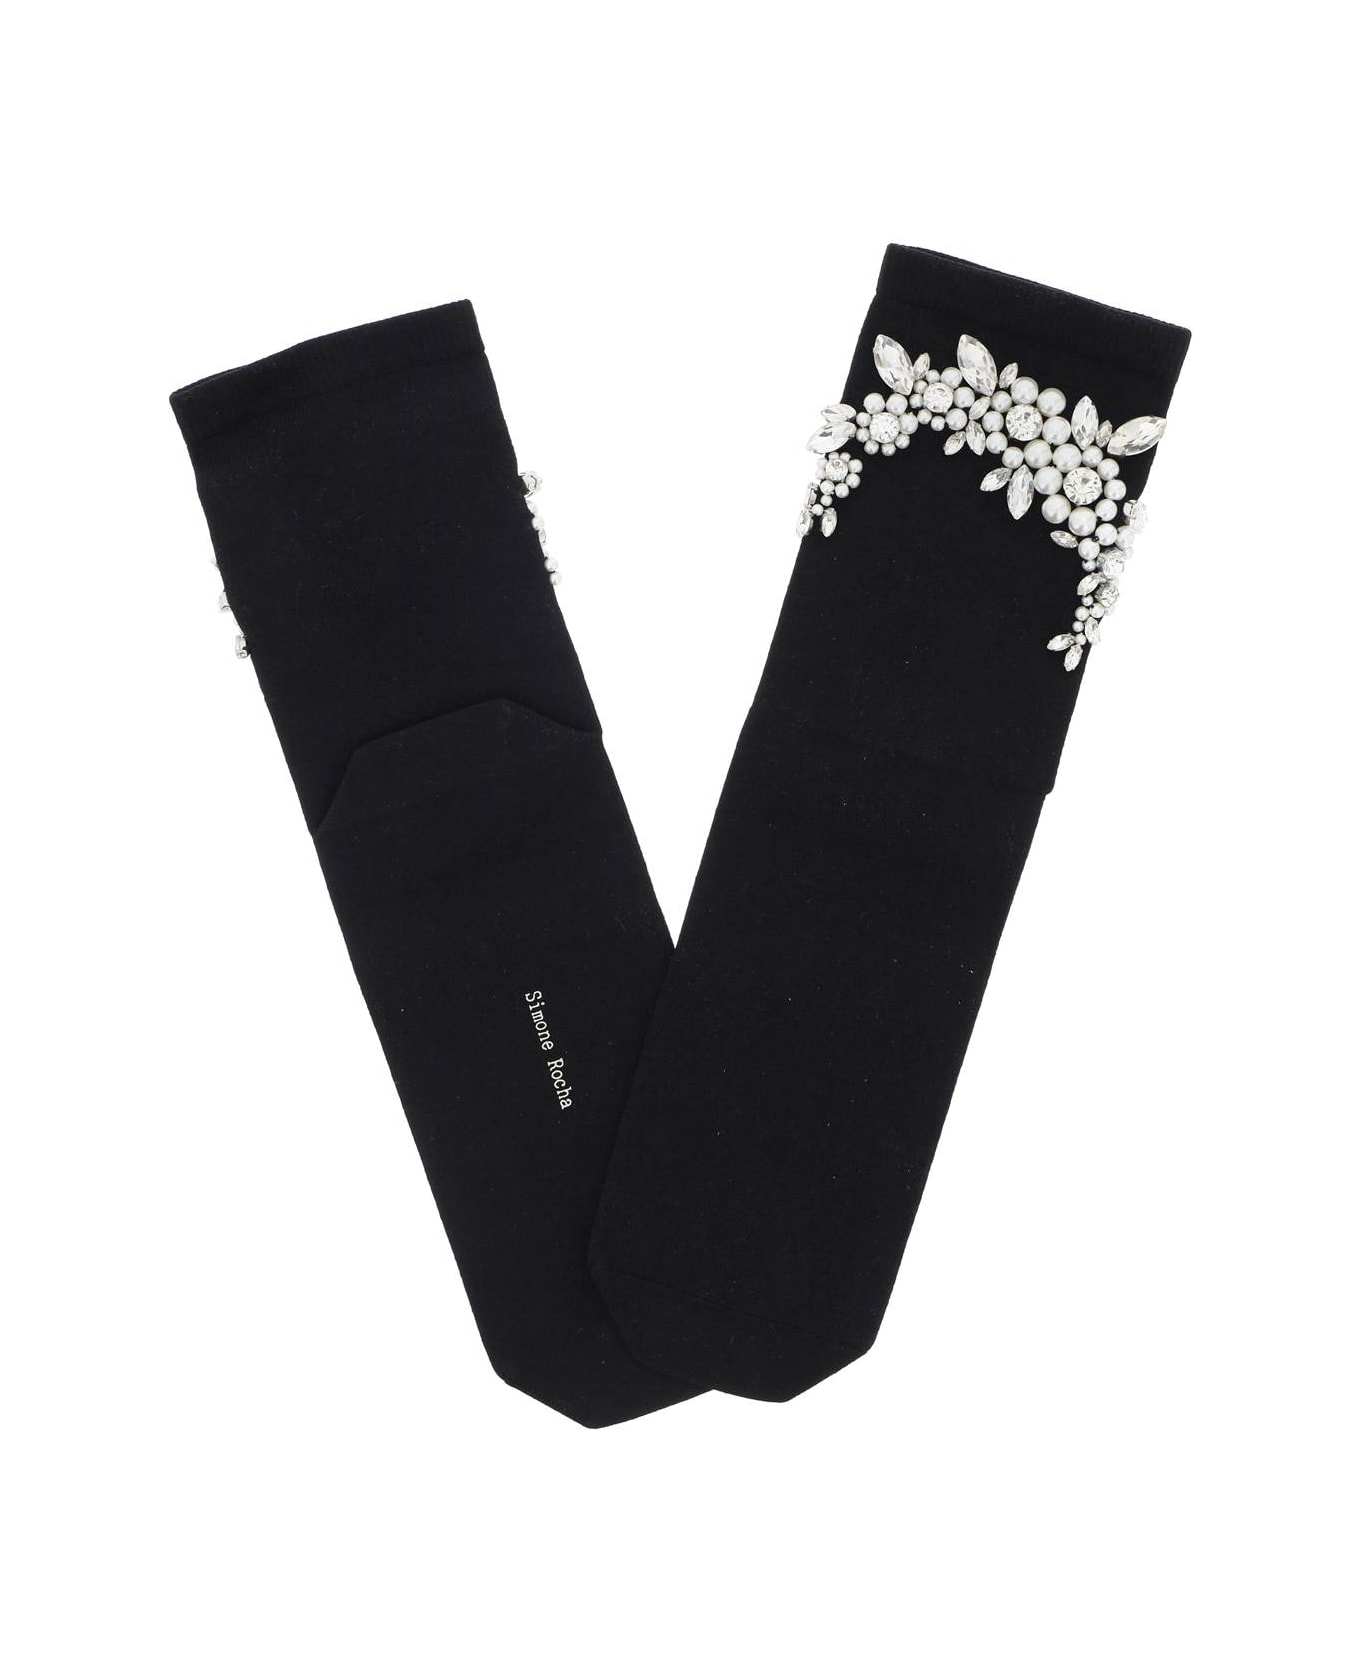 Simone Rocha Socks With Pearls And Crystals - BLACK PEARL CLEAR (Black) 靴下＆タイツ